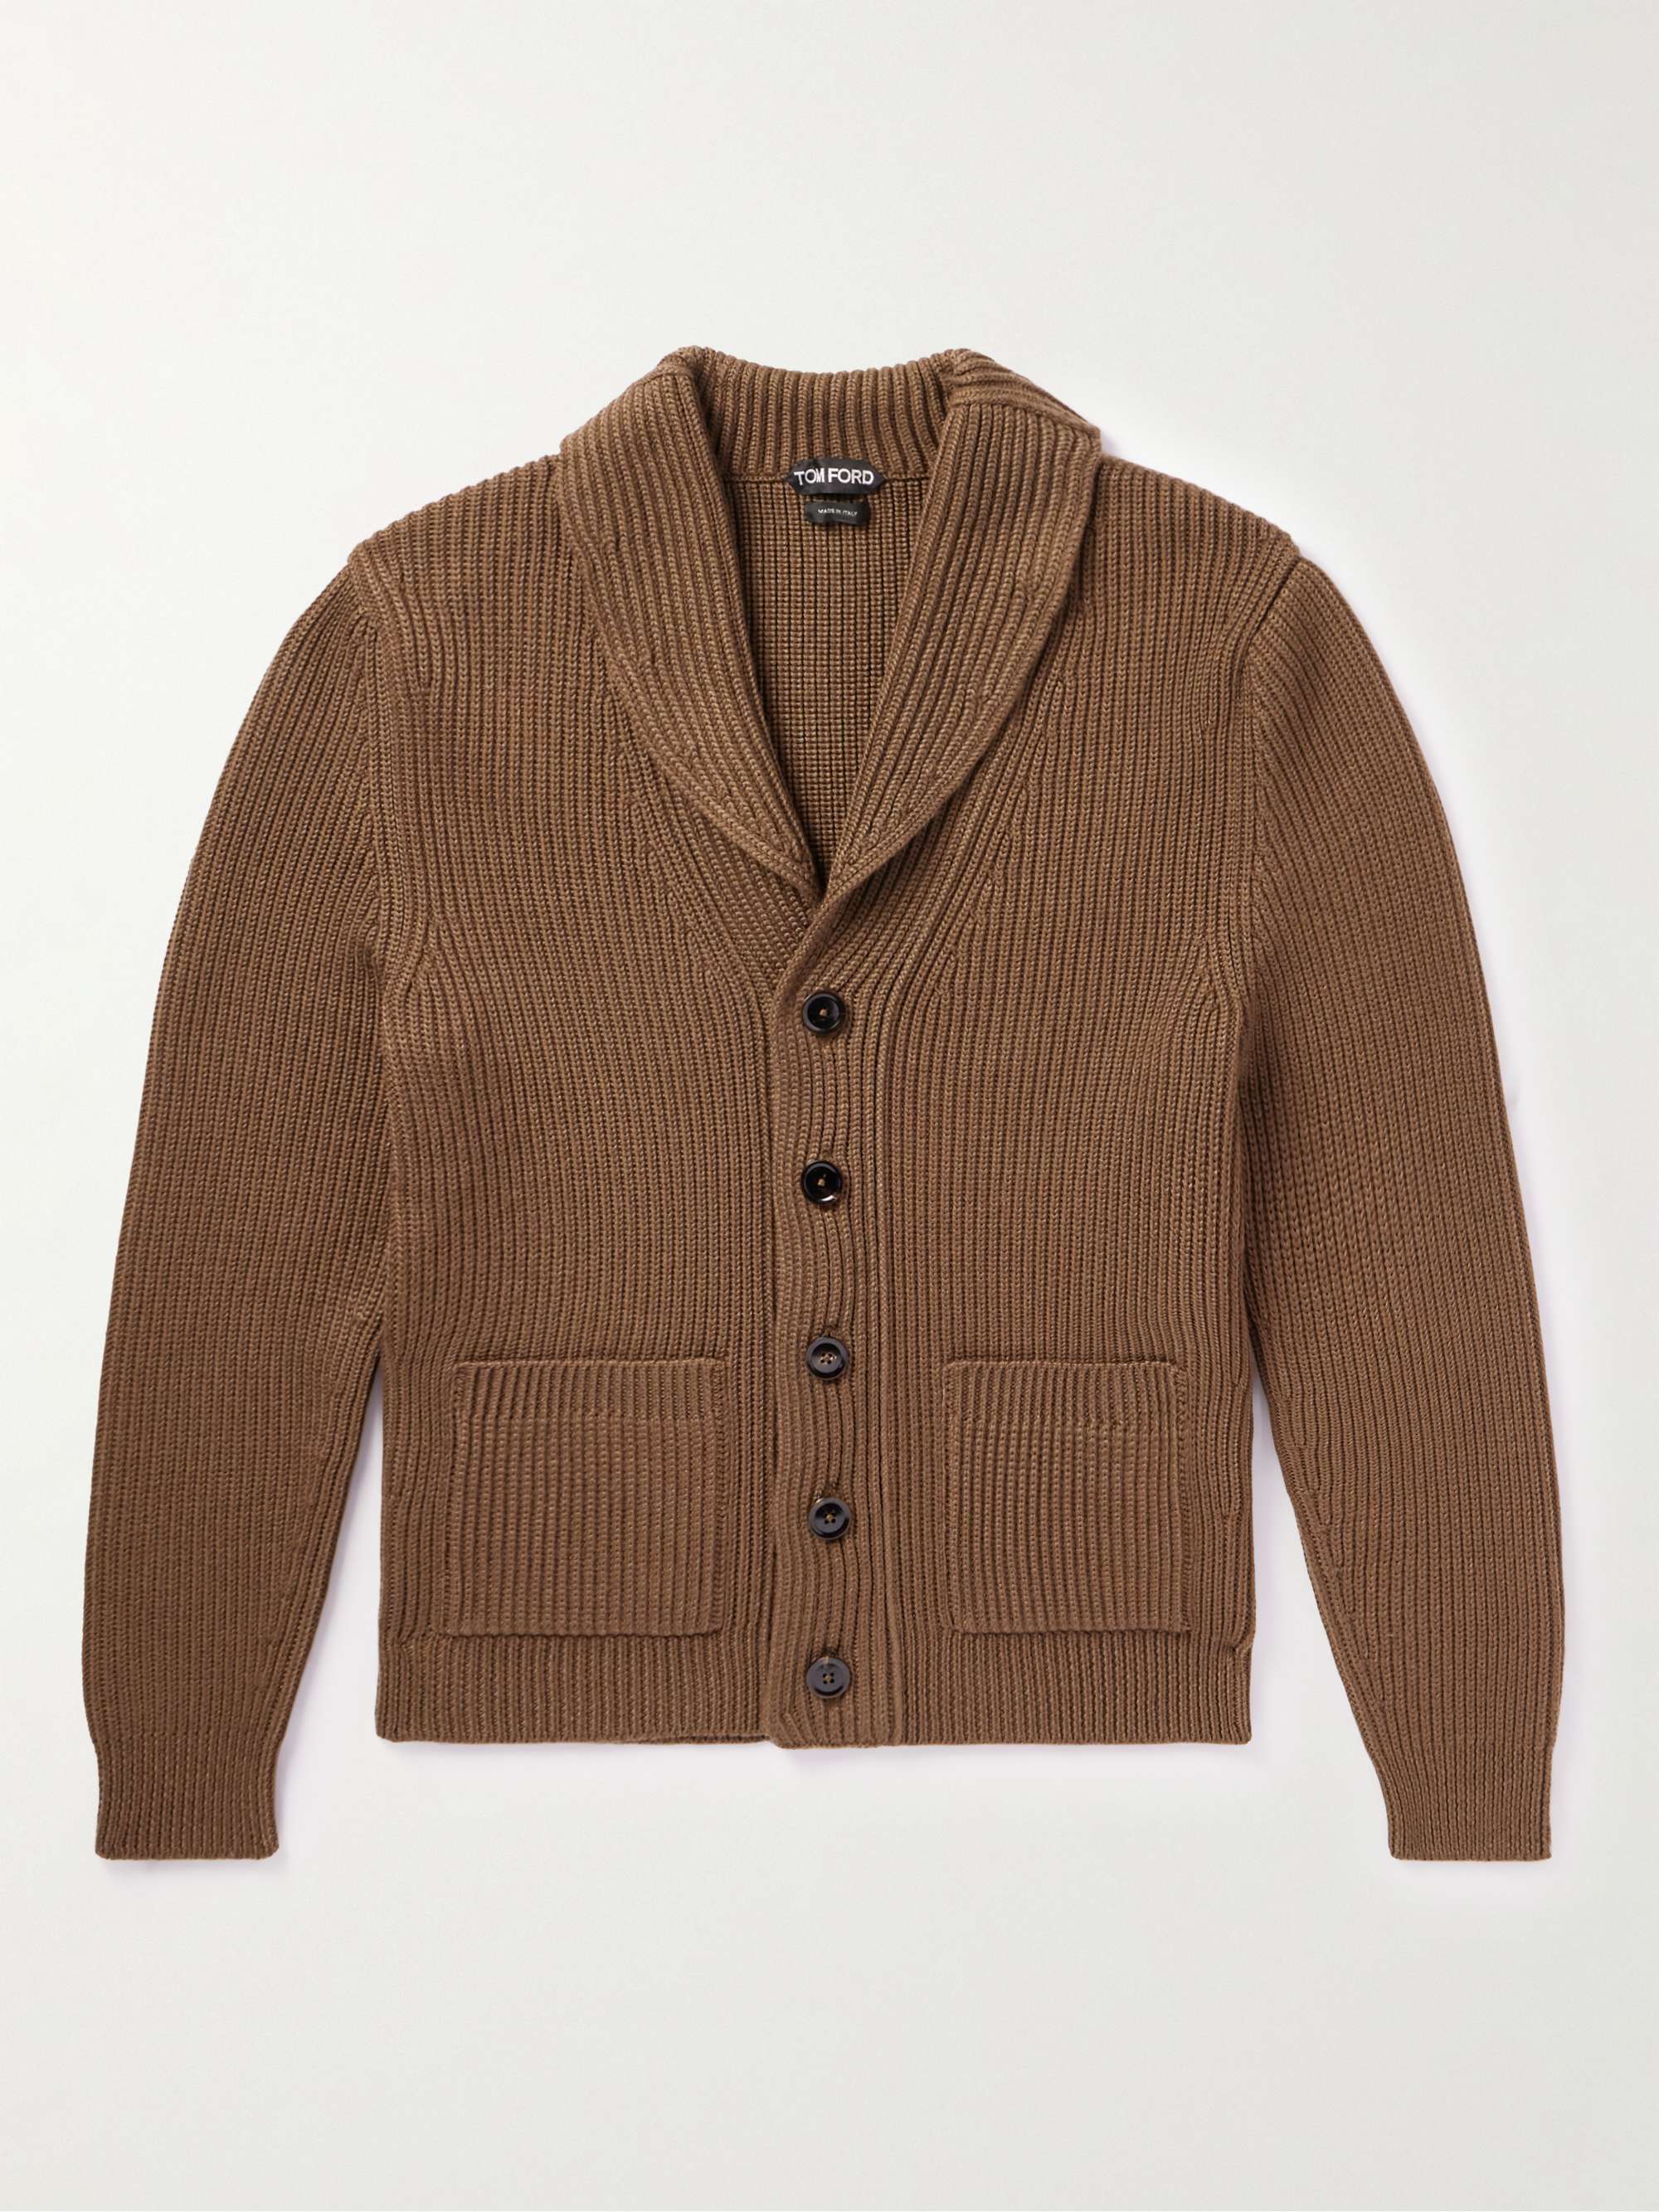 TOM FORD Shawl-Collar Ribbed Wool and Silk-Blend Cardigan for Men | MR  PORTER